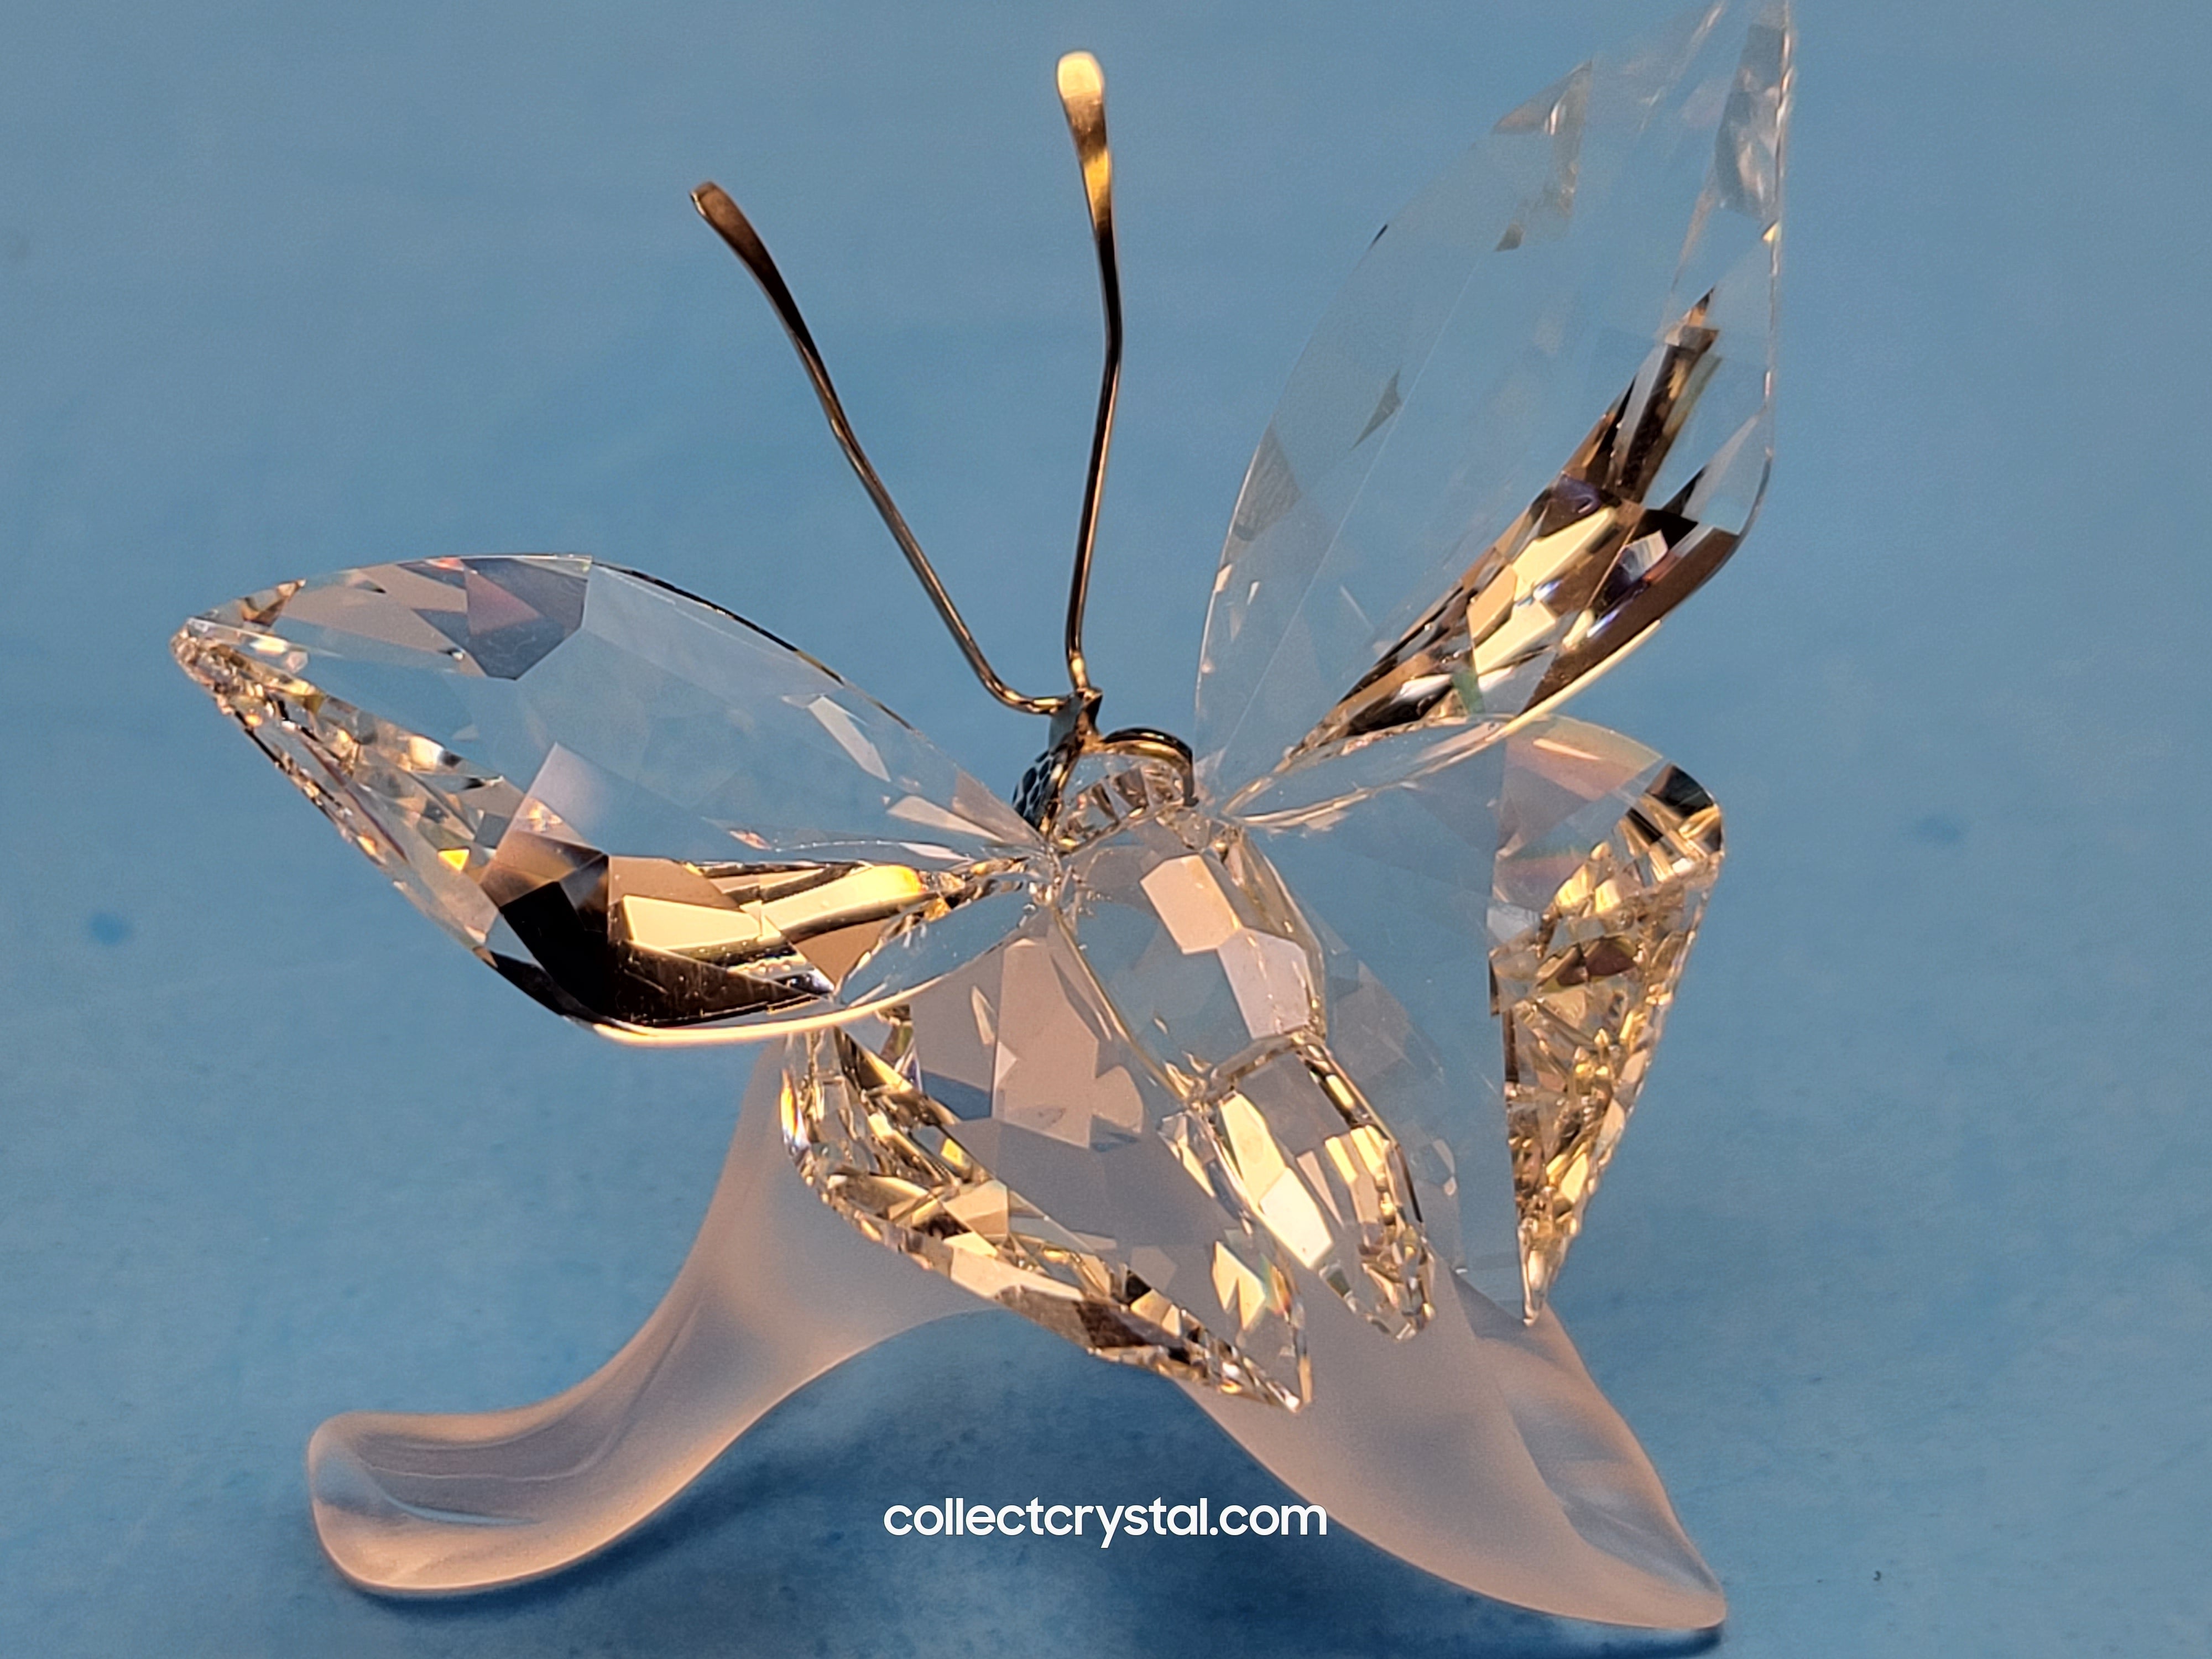 BUTTERFLY ON LEAF 182920 – Collect Crystal